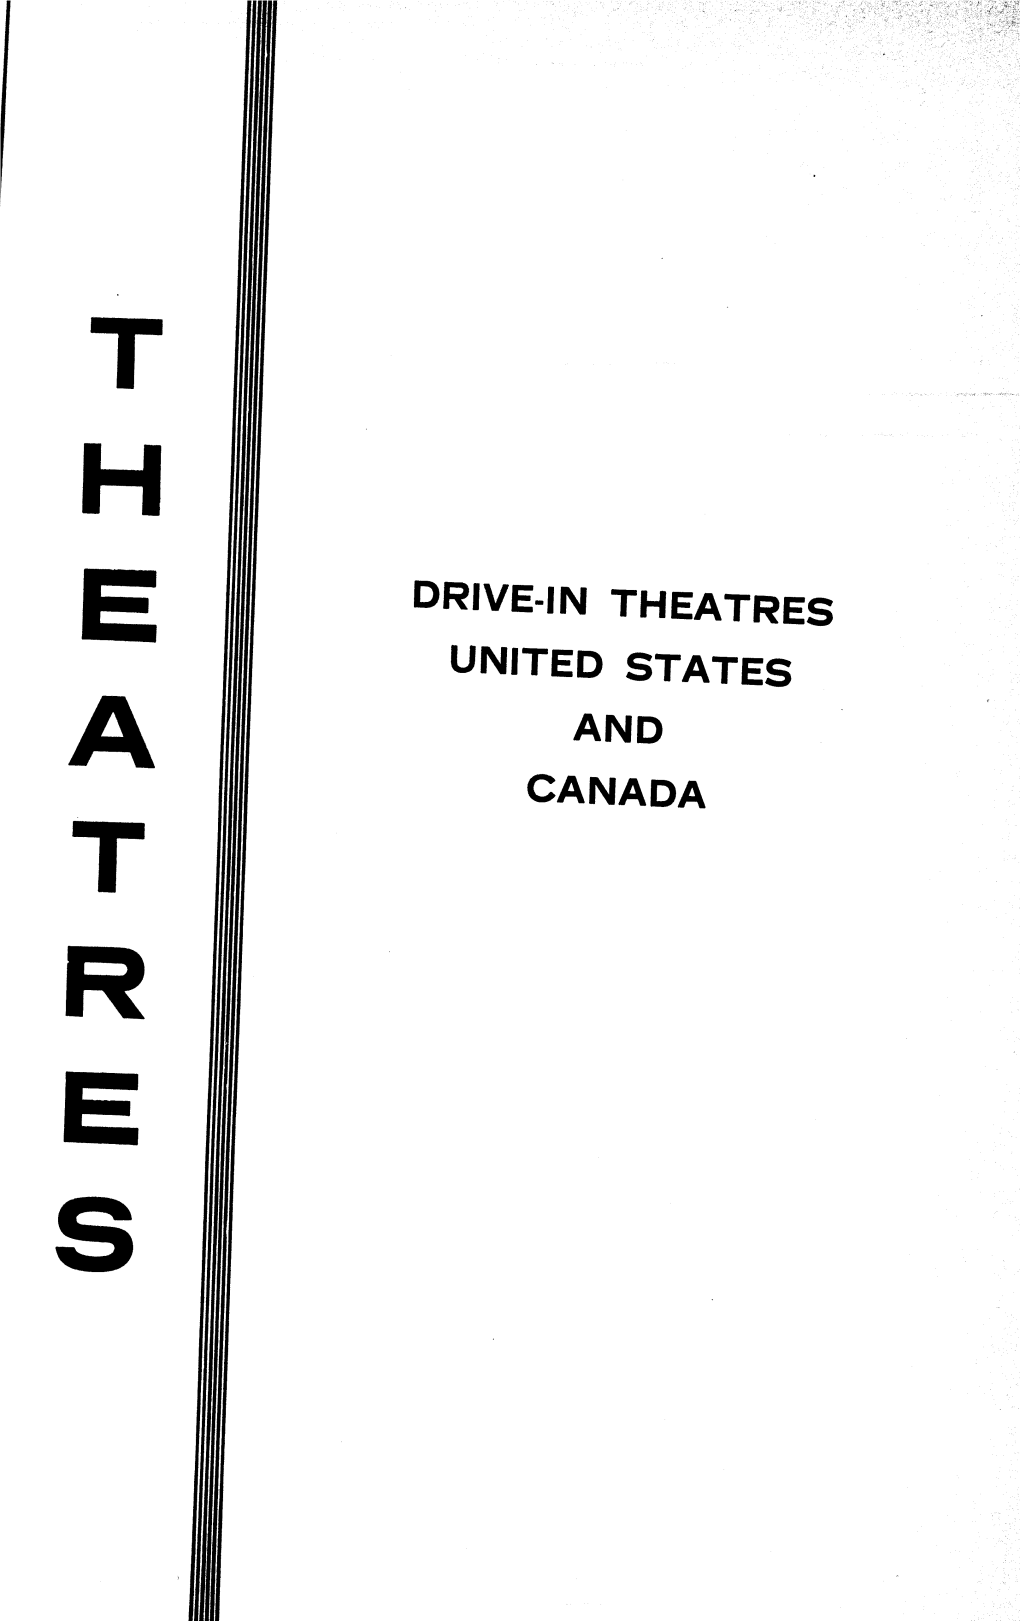 Drive-In Theatres United States and Canada Drive-In Theatres